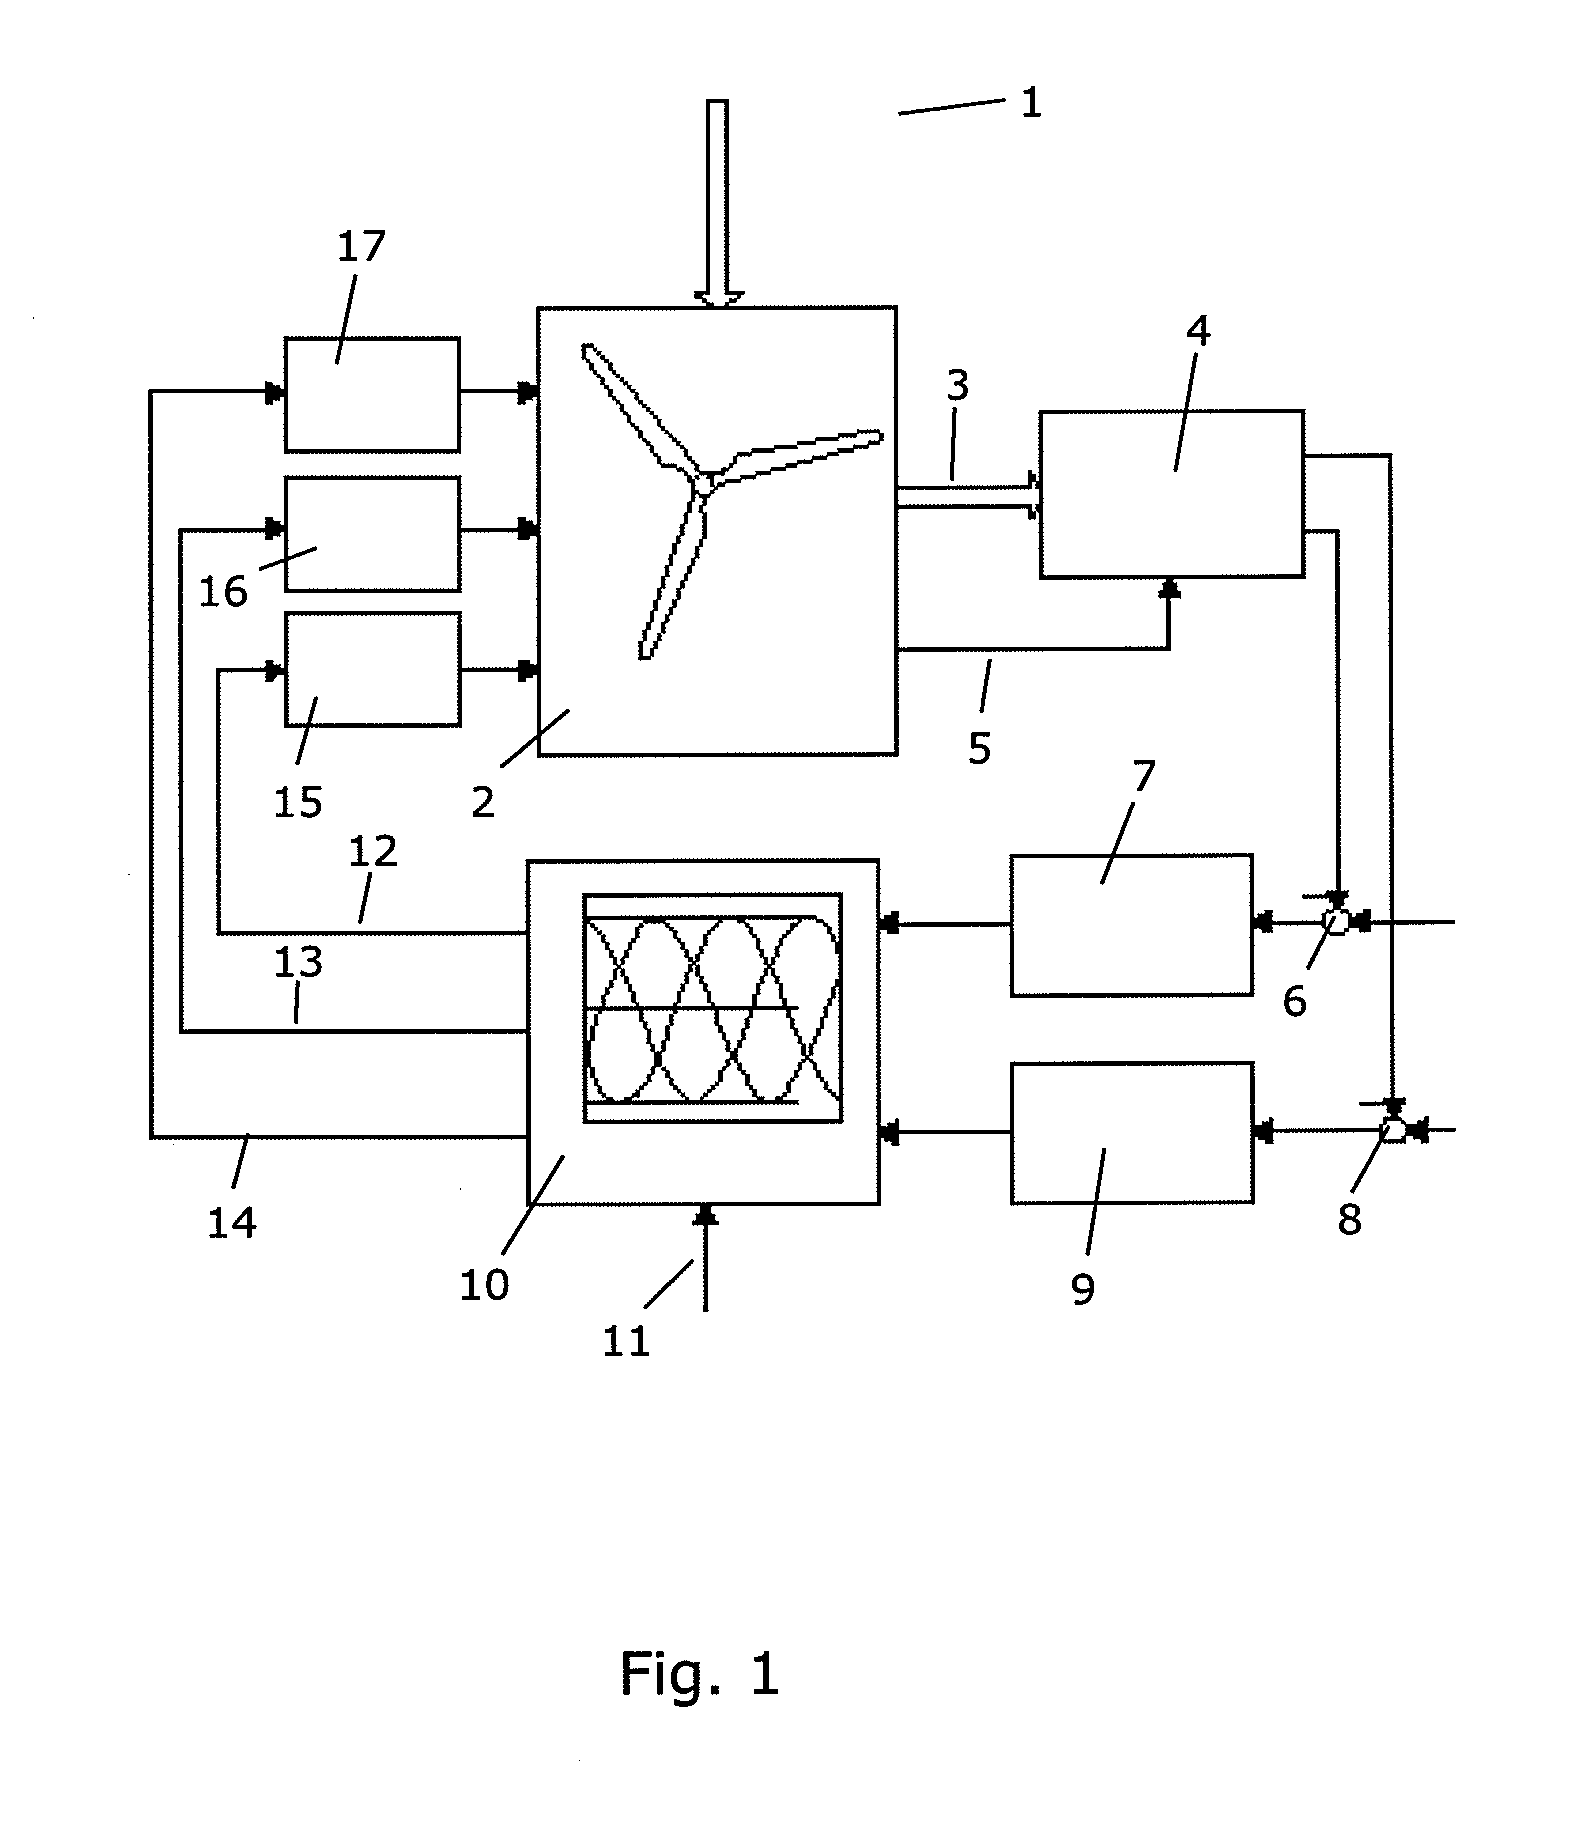 Method for evaluating performance of a system for controlling pitch of a set of blades of a wind turbine